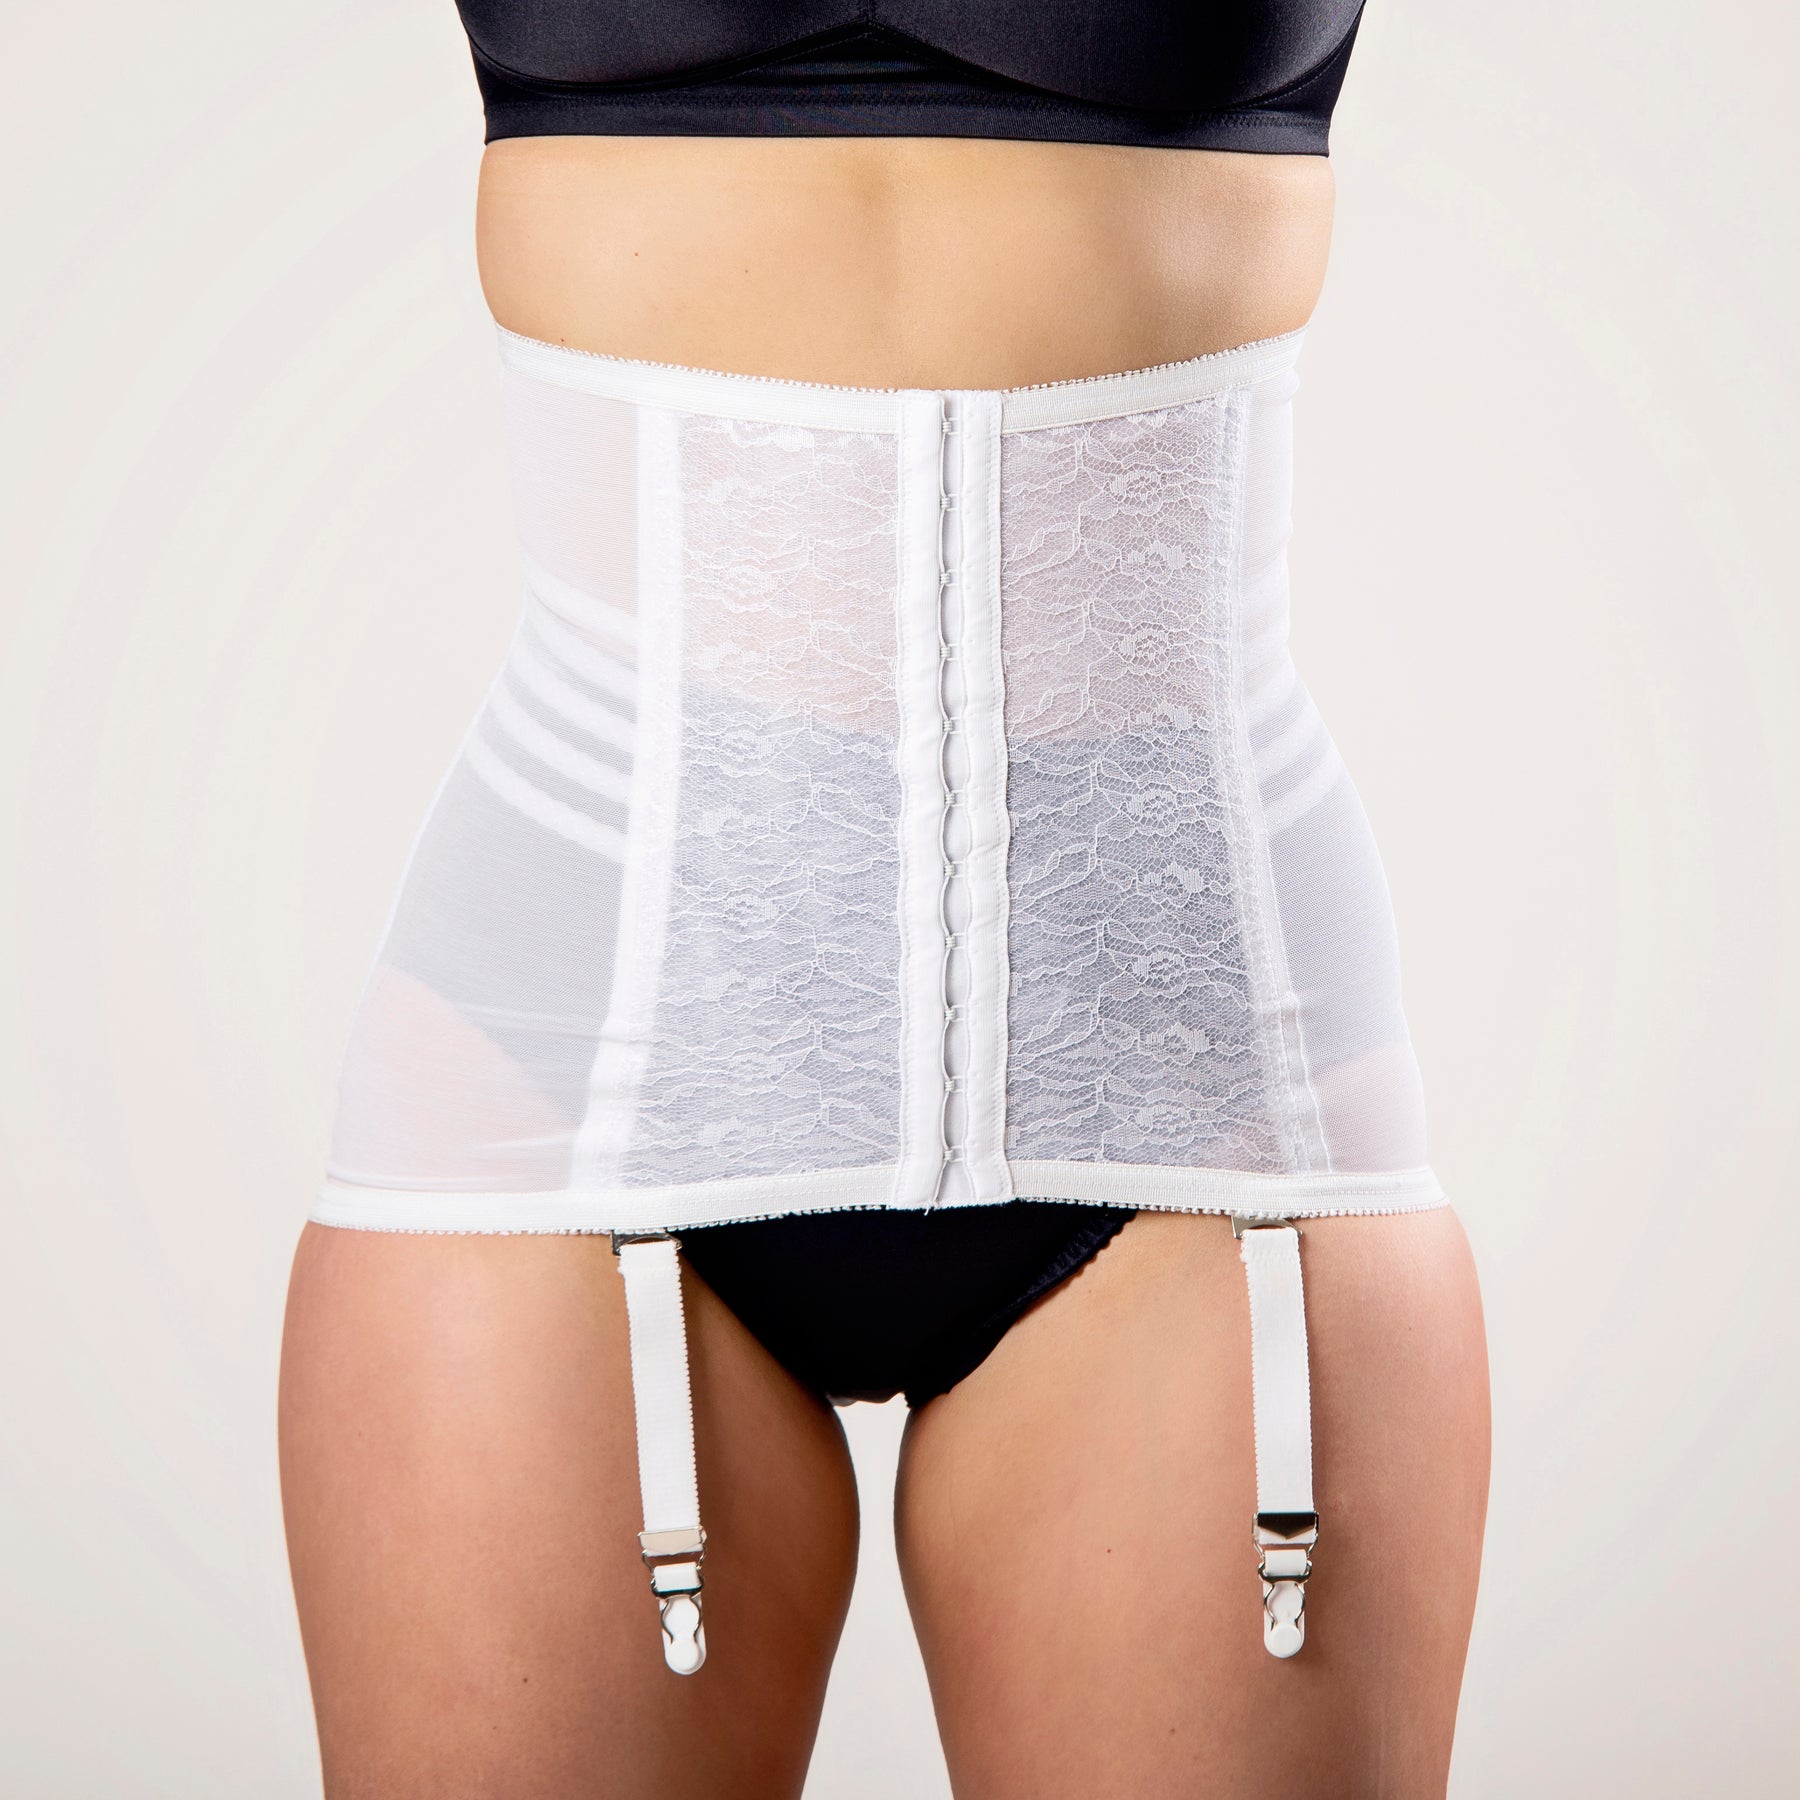 Wholesale Girdles With Garters To Create Slim And Fit Looking